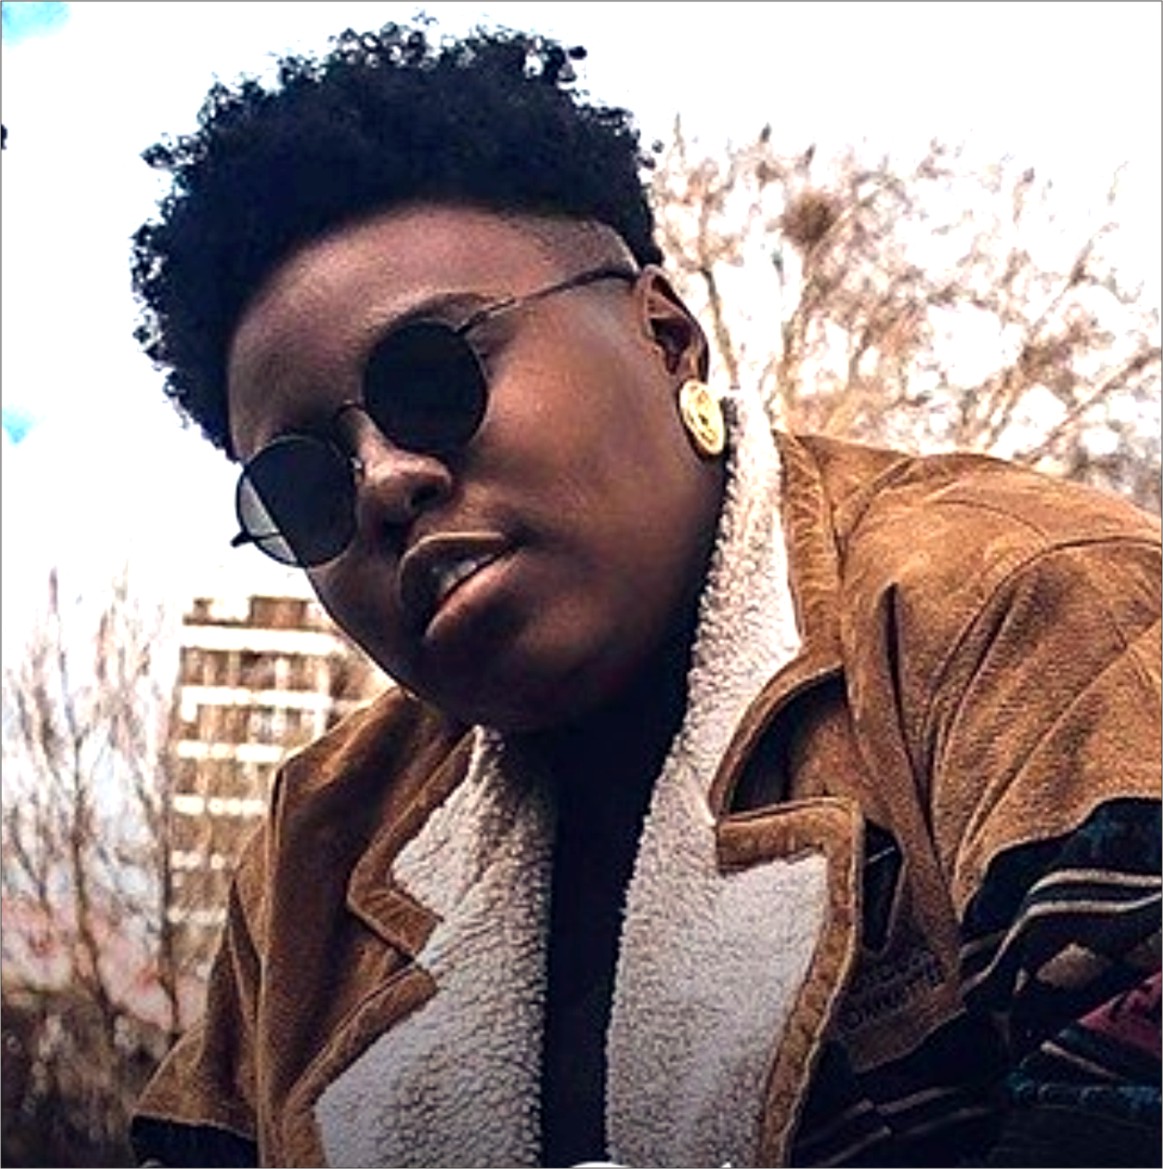 The Amazing Story Of Hip Hop Star TENI